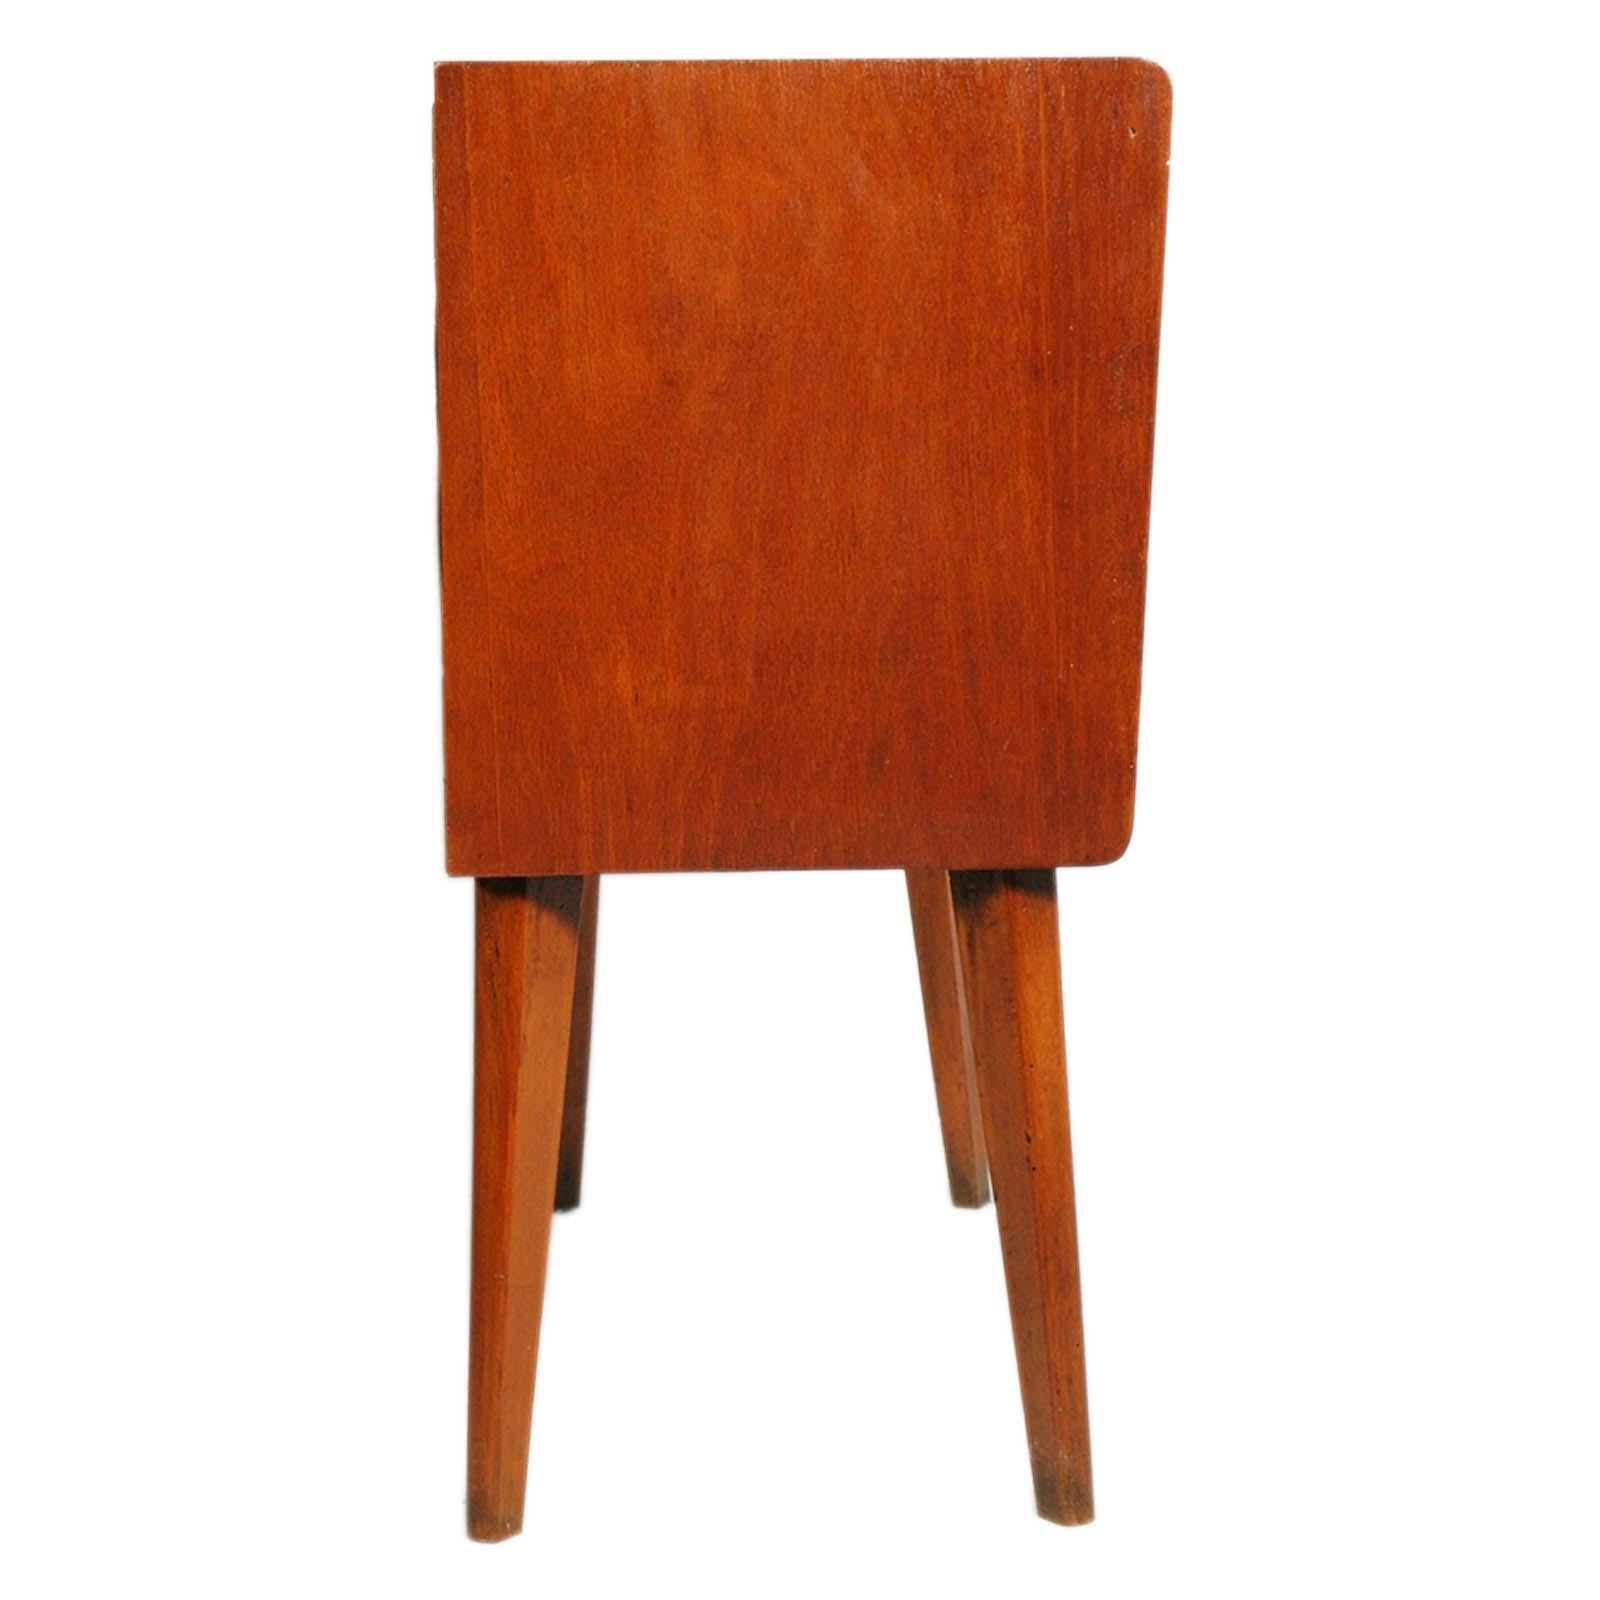 Mid-Century Modern Art Deco Dry Bar Cabinet by Meroni & Fossati Gio Ponti attributed, Briar of Elm For Sale